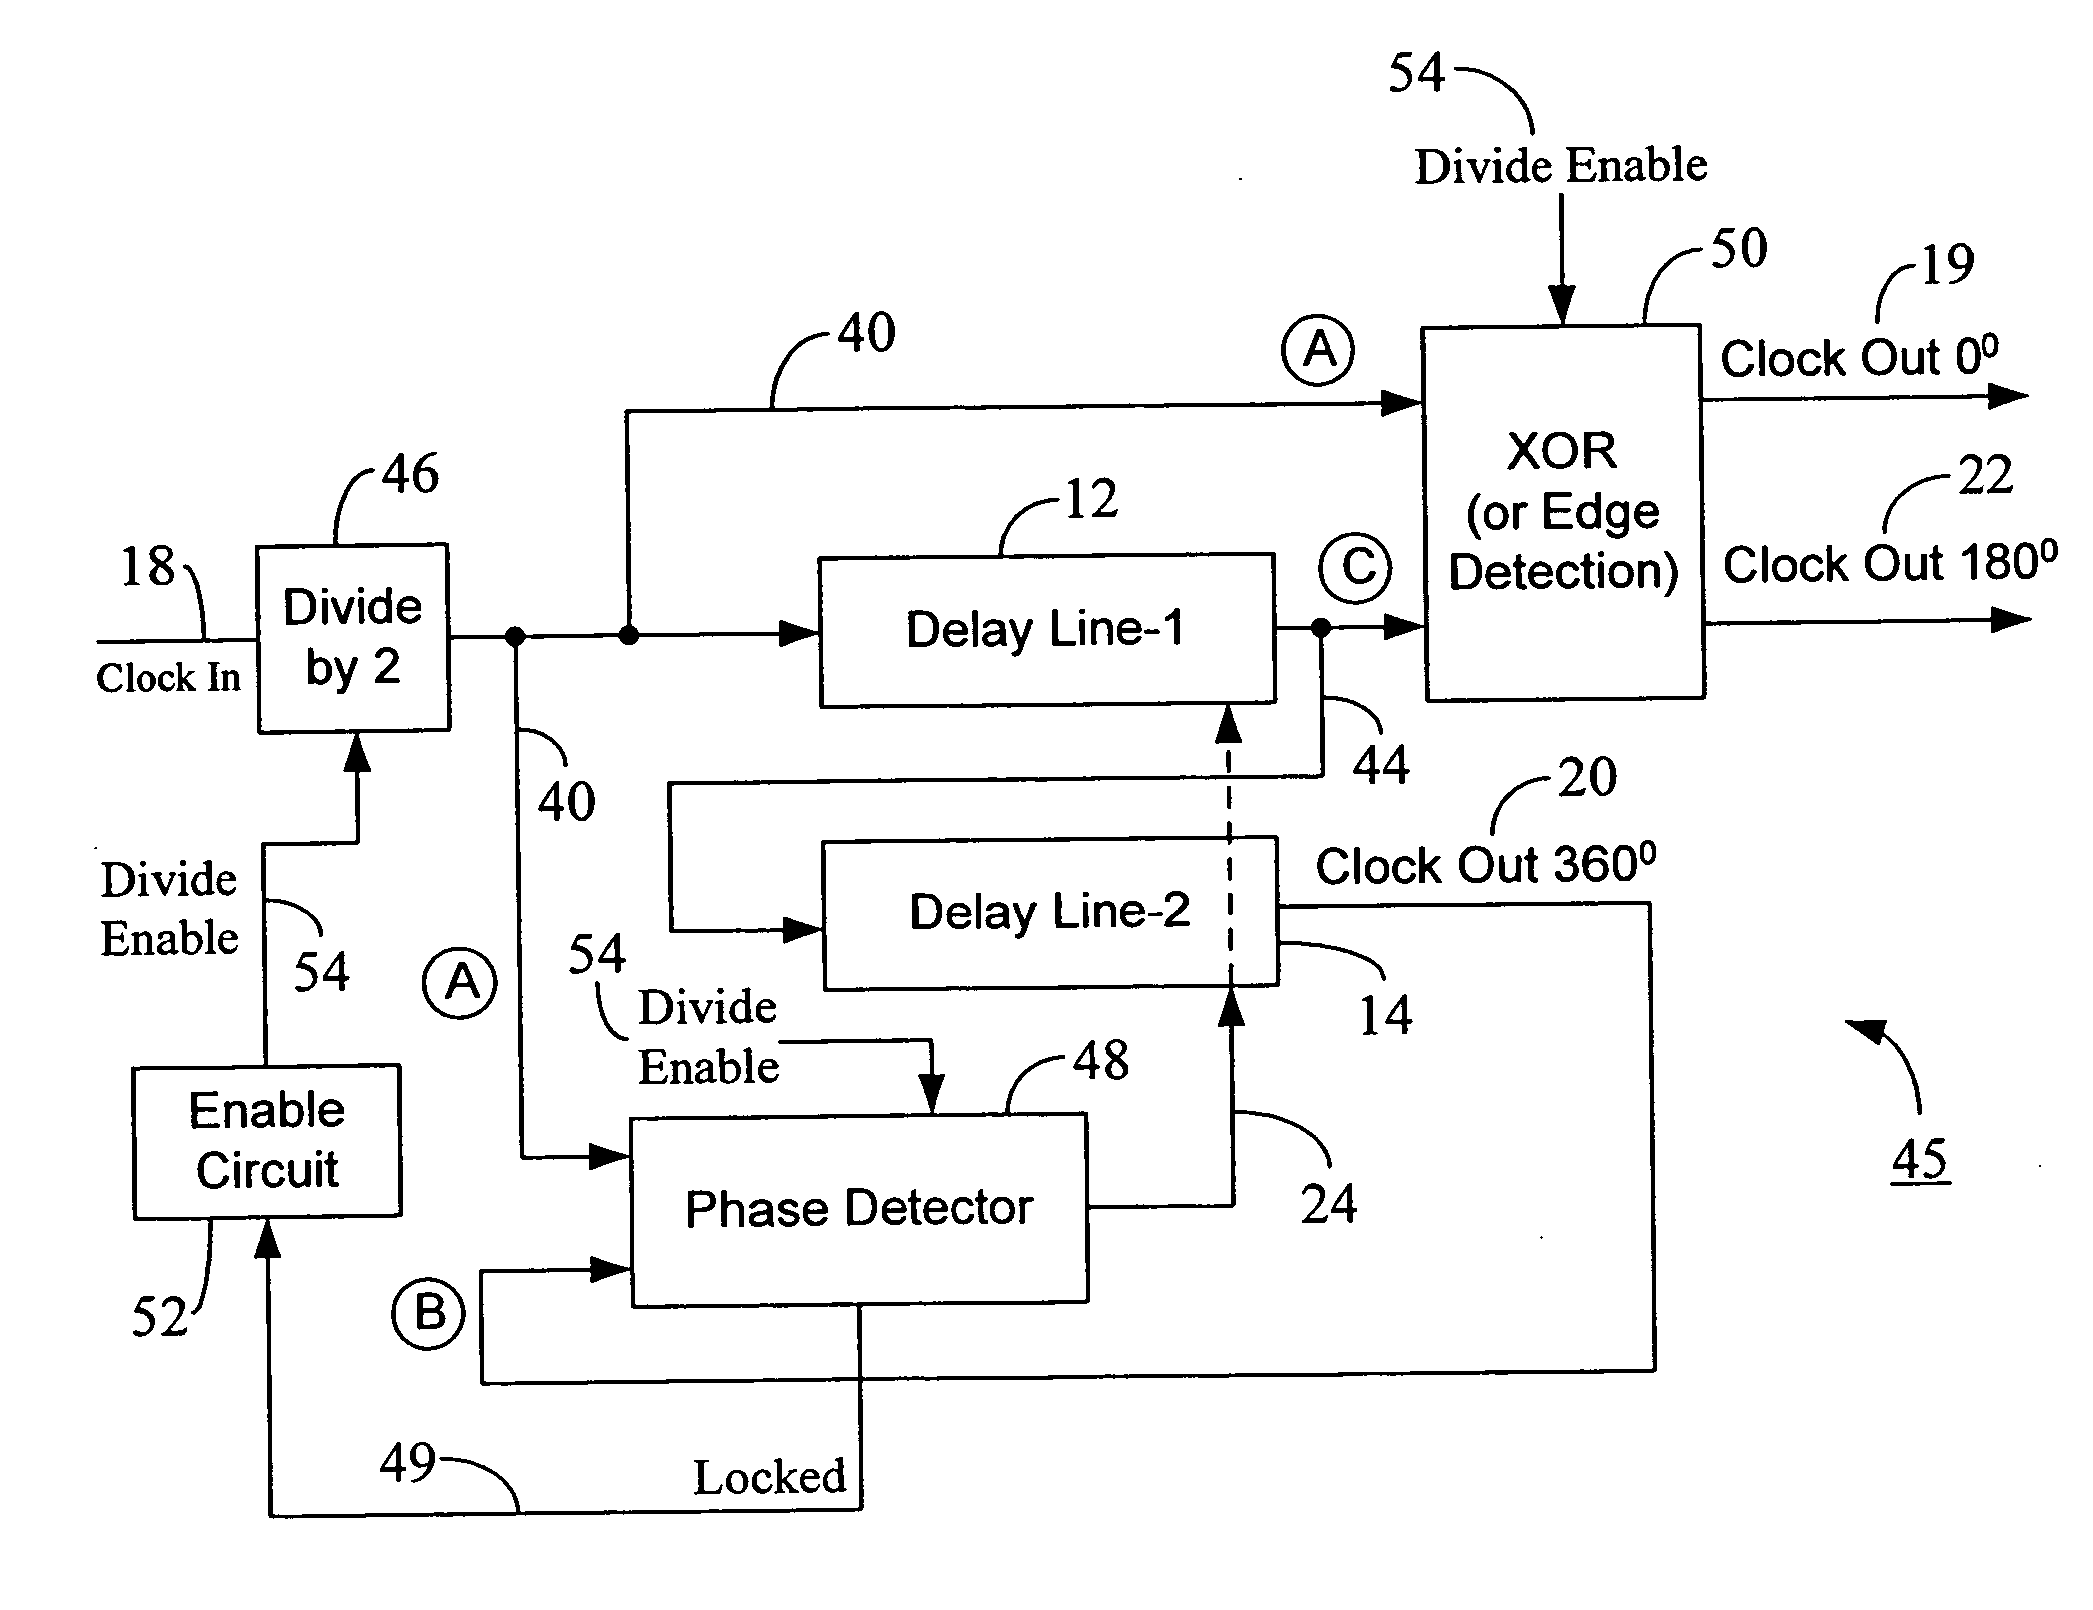 Initialization scheme for a reduced-frequency, fifty percent duty cycle corrector